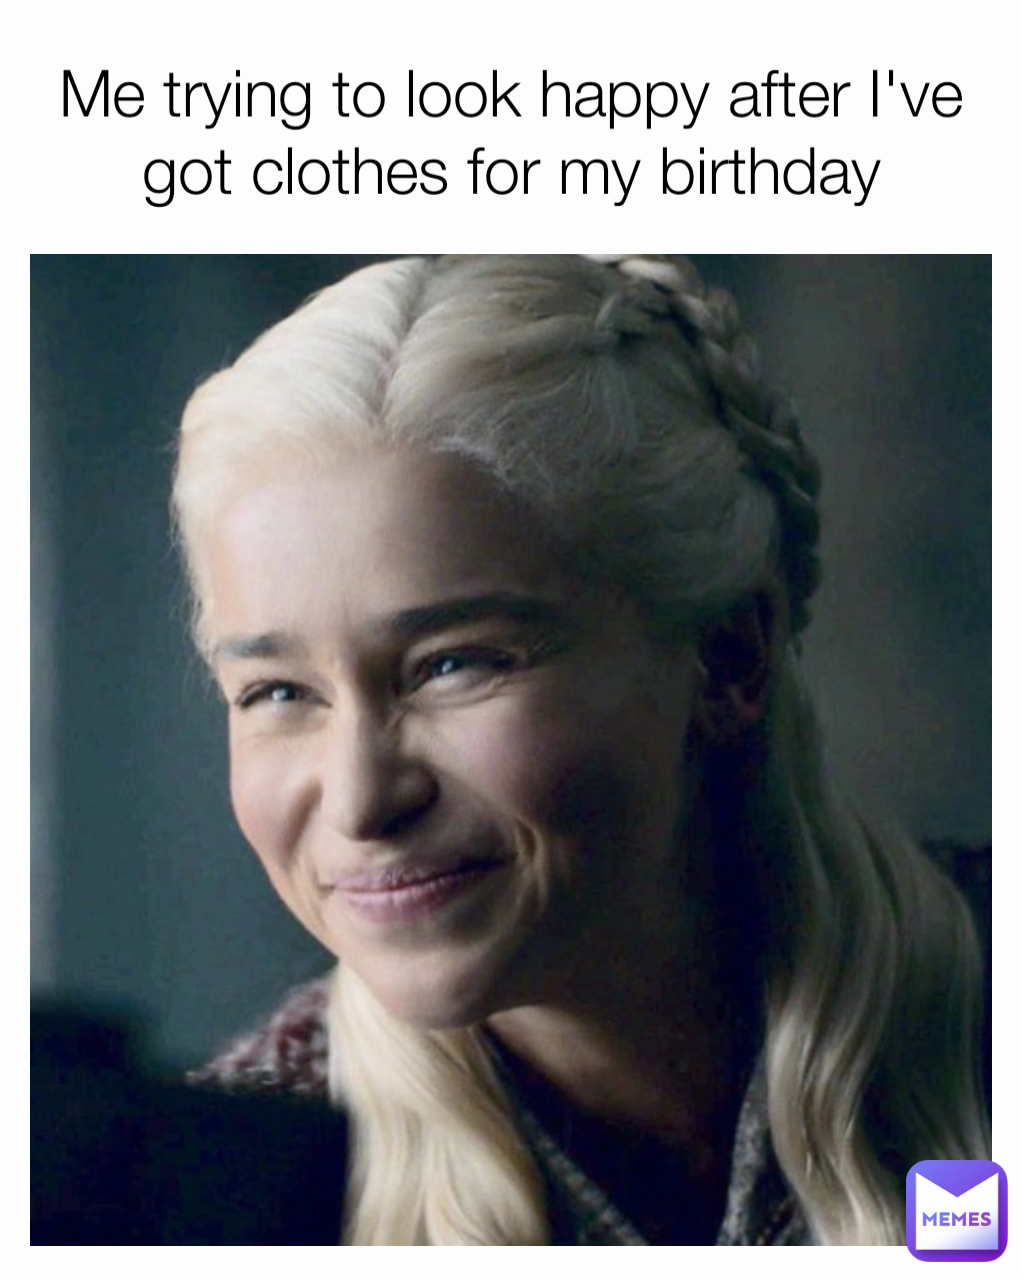 Me trying to look happy after I've got clothes for my birthday